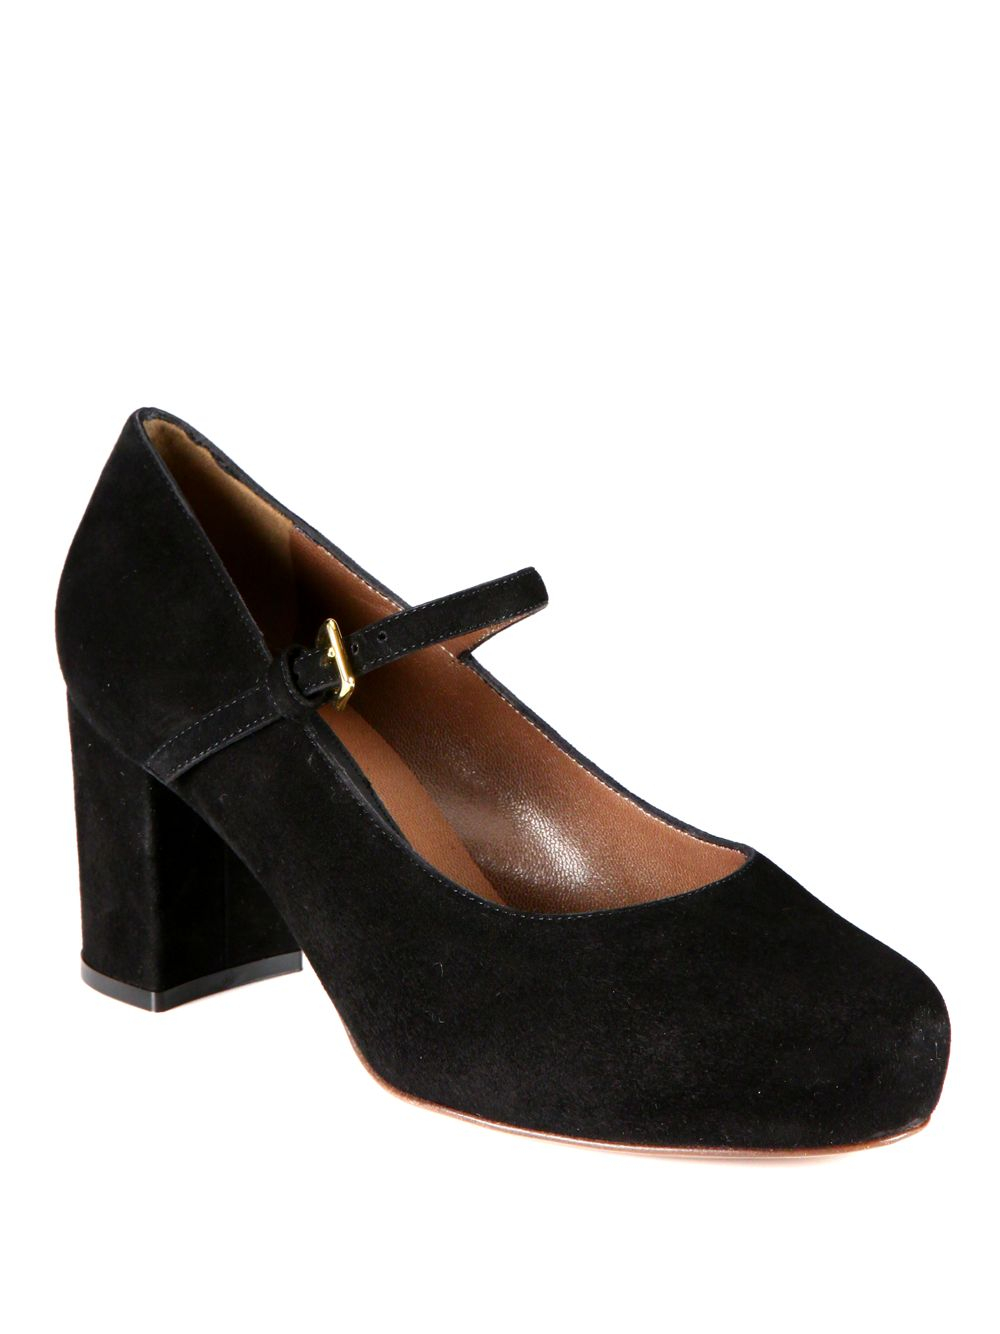 Marni Suede Mary Jane Pumps in Black | Lyst